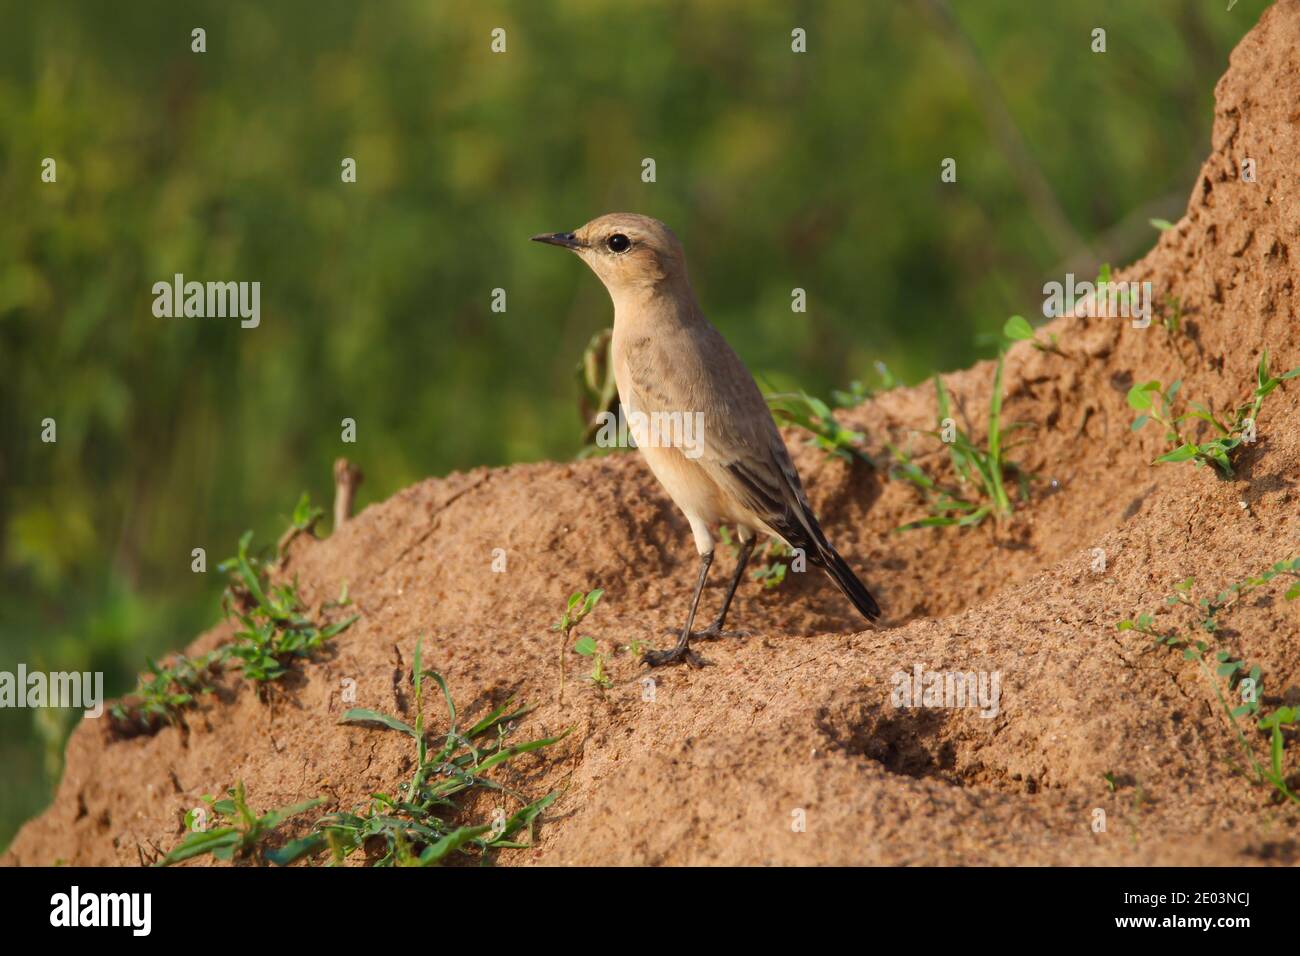 Isabelline wheatear Bird perched on a mud hump Stock Photo